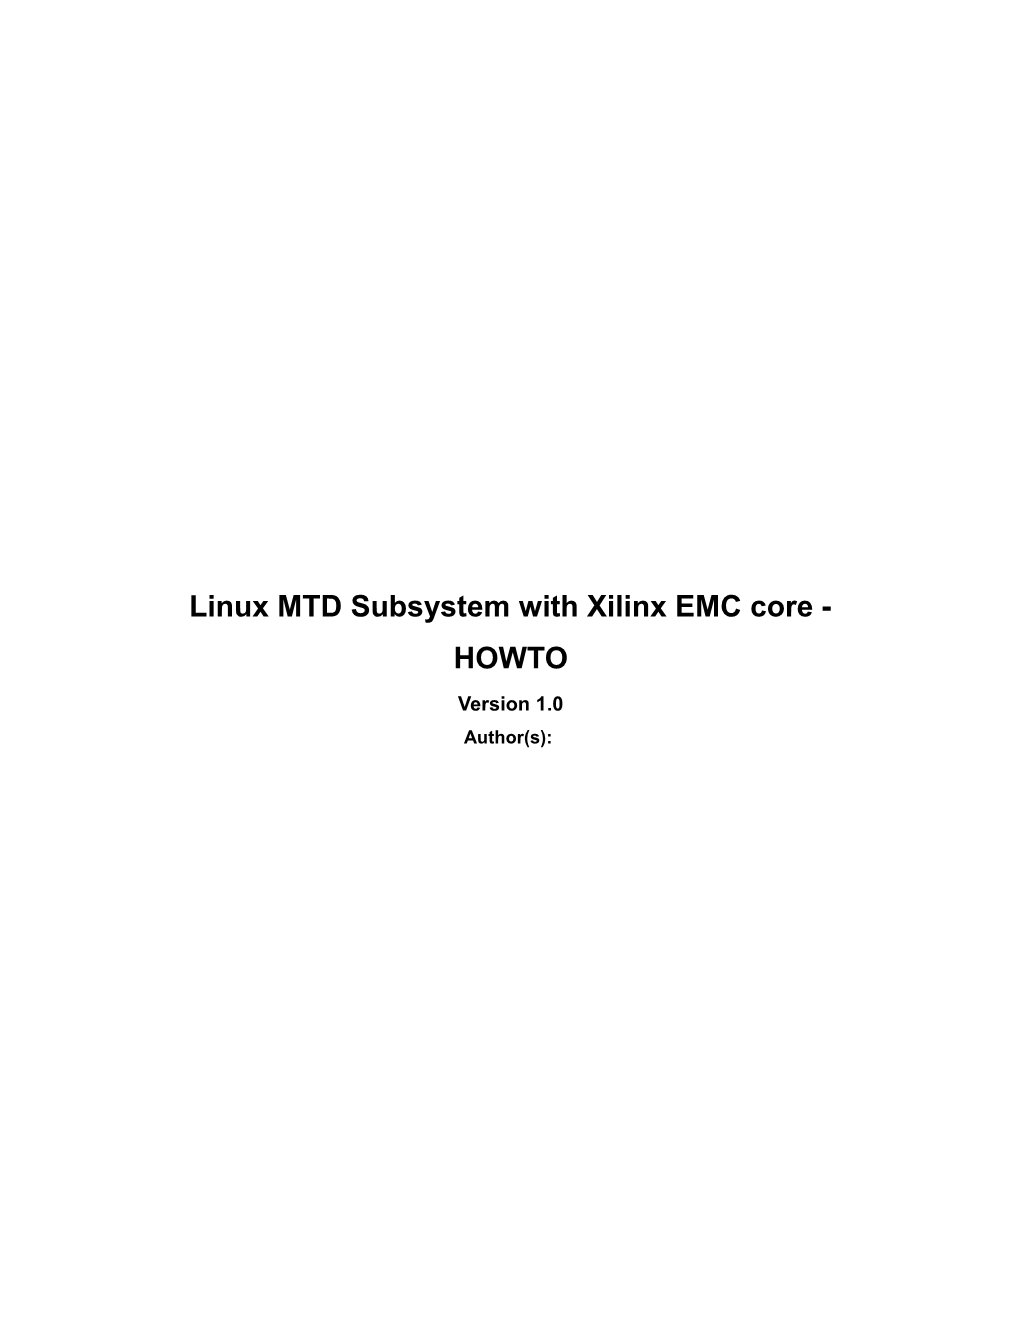 Linux MTD Subsystem with Xilinx EMC Core - HOWTO